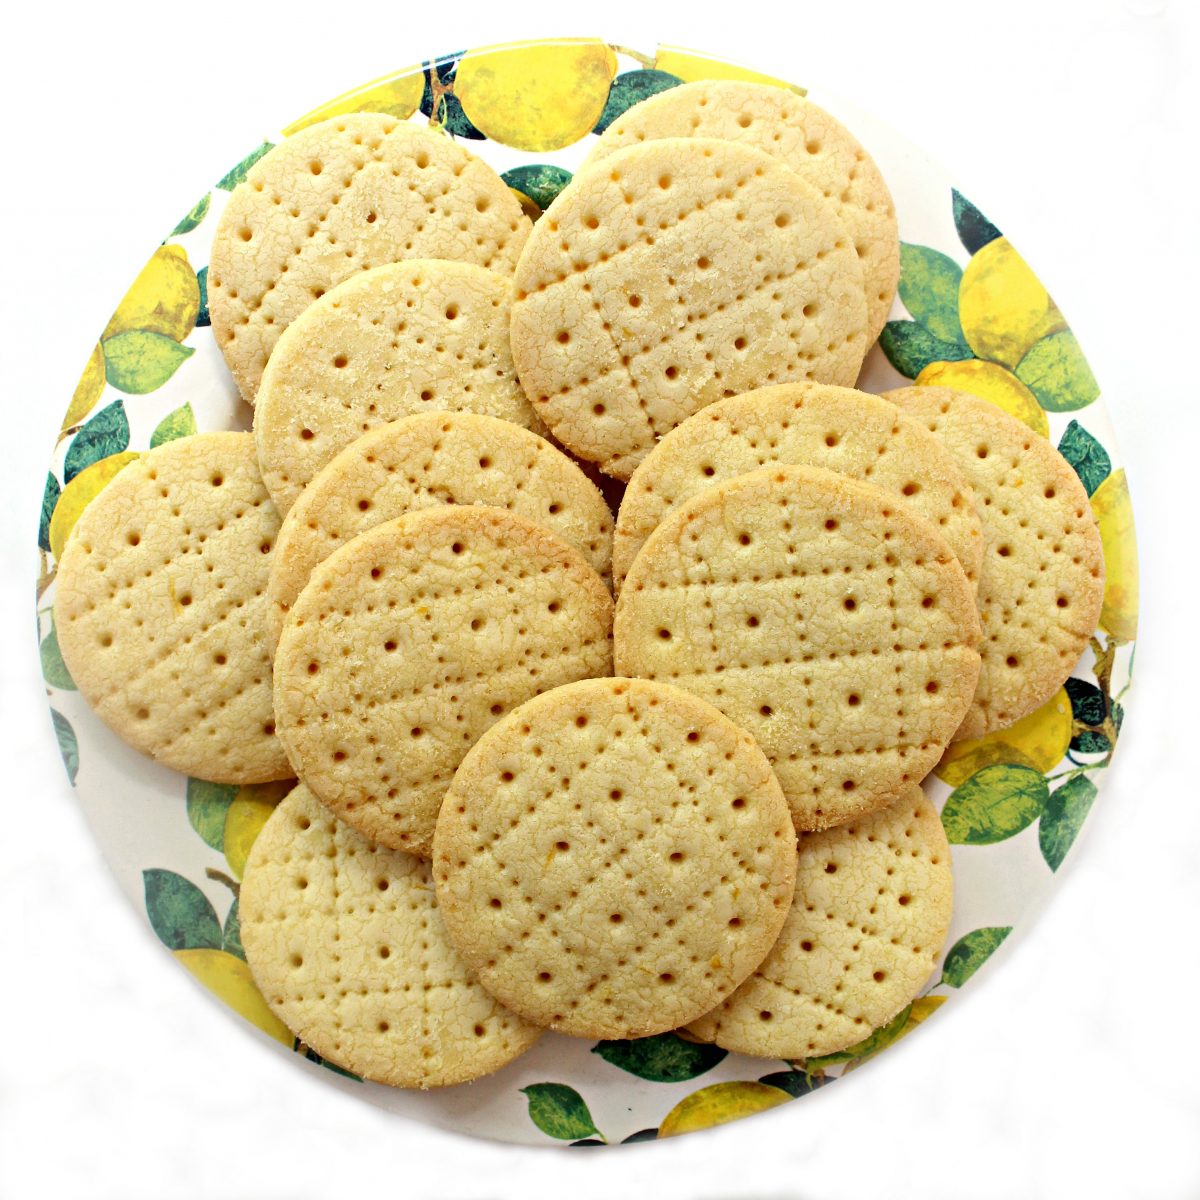 Shrewsbury cookies embossed with grid lines on a round platter.